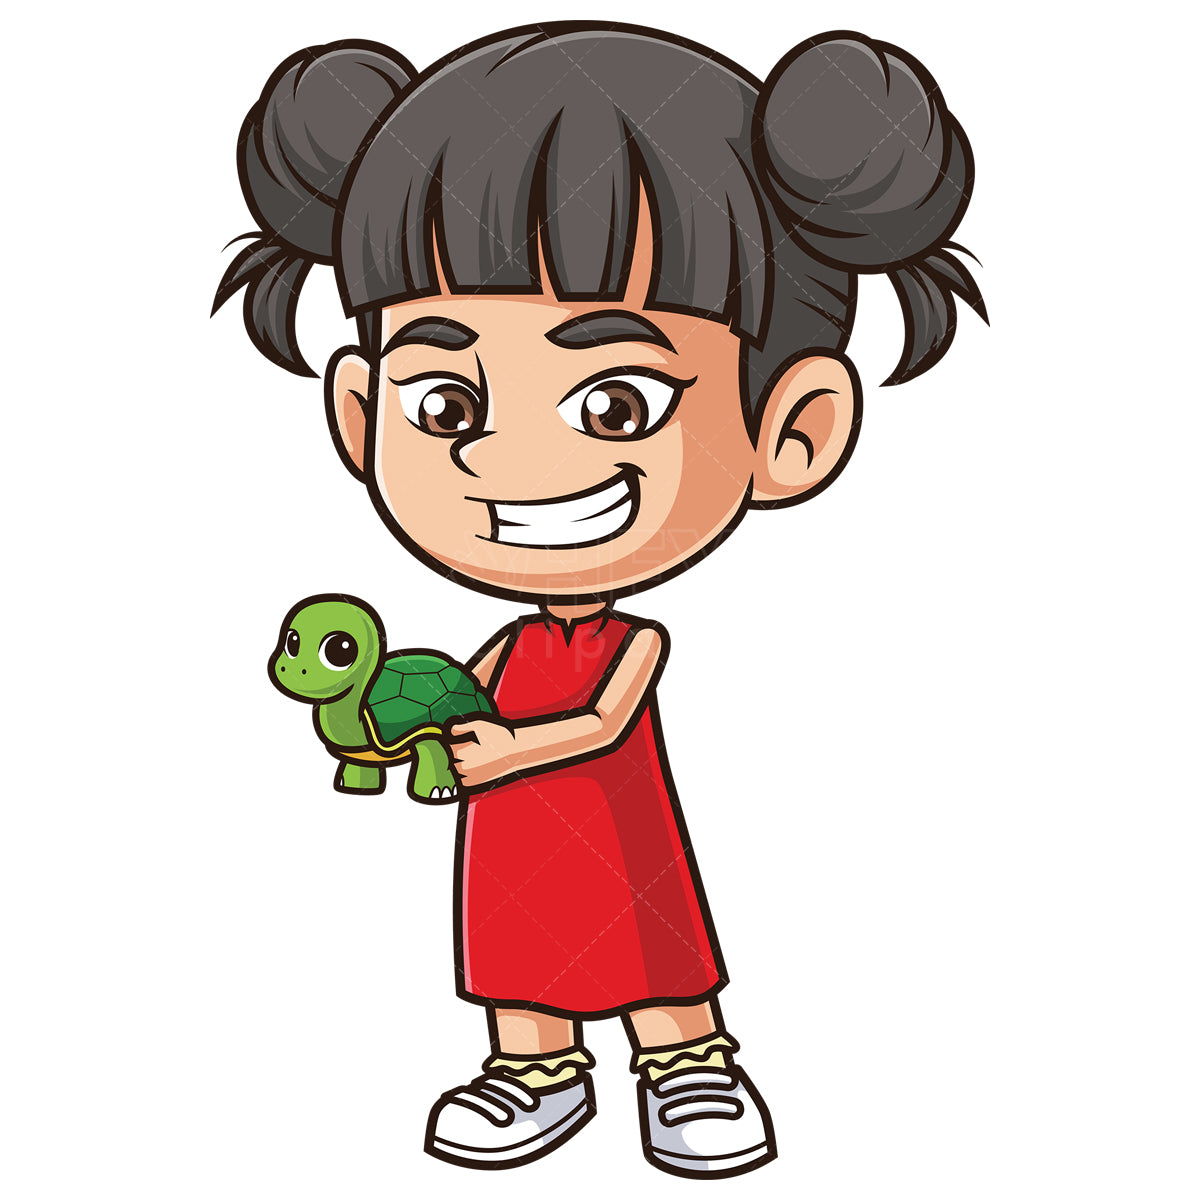 Royalty-free stock vector illustration of an asian girl holding turtle.